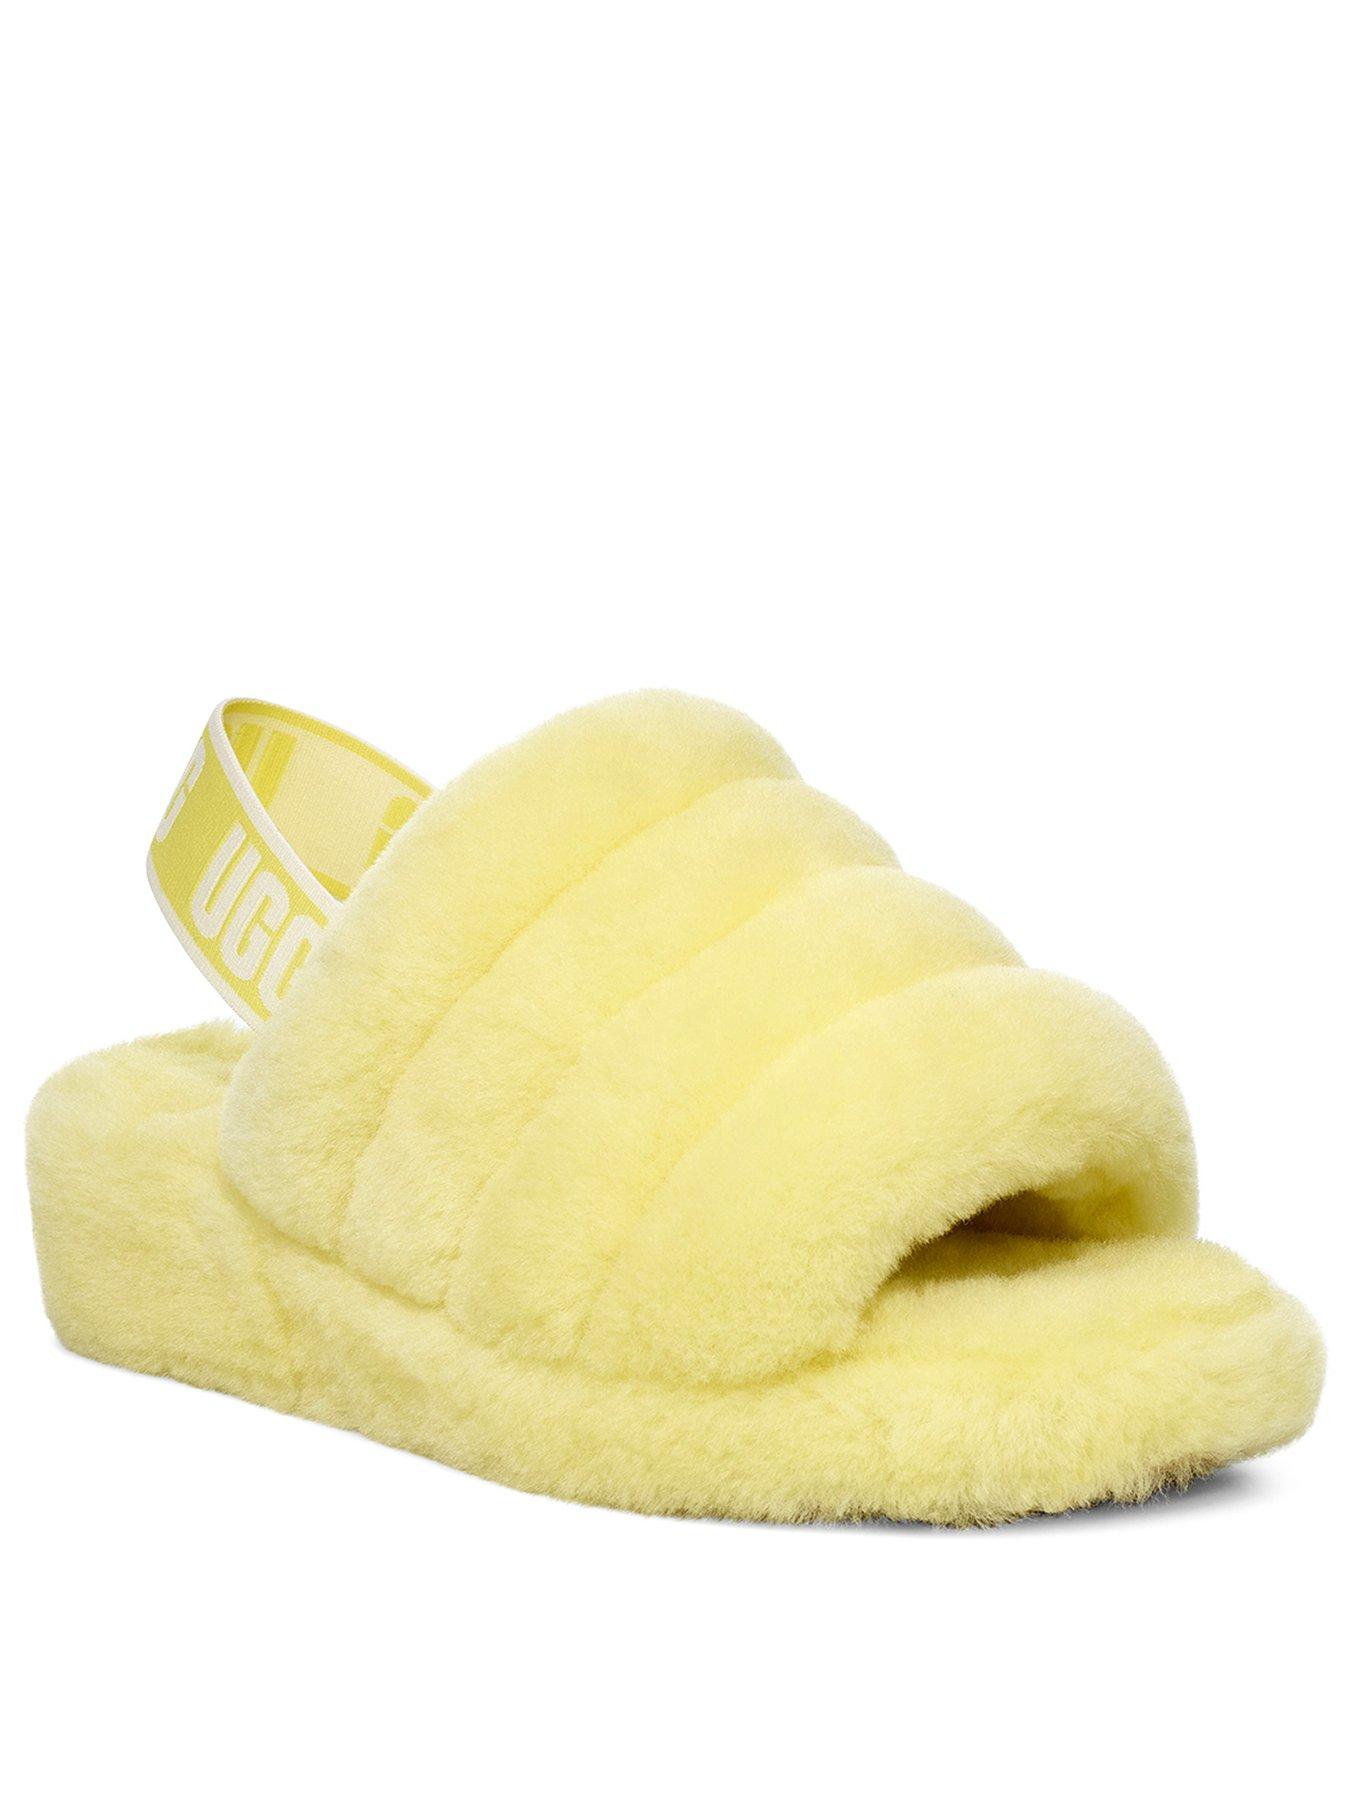 yellow ugg slippers size 4